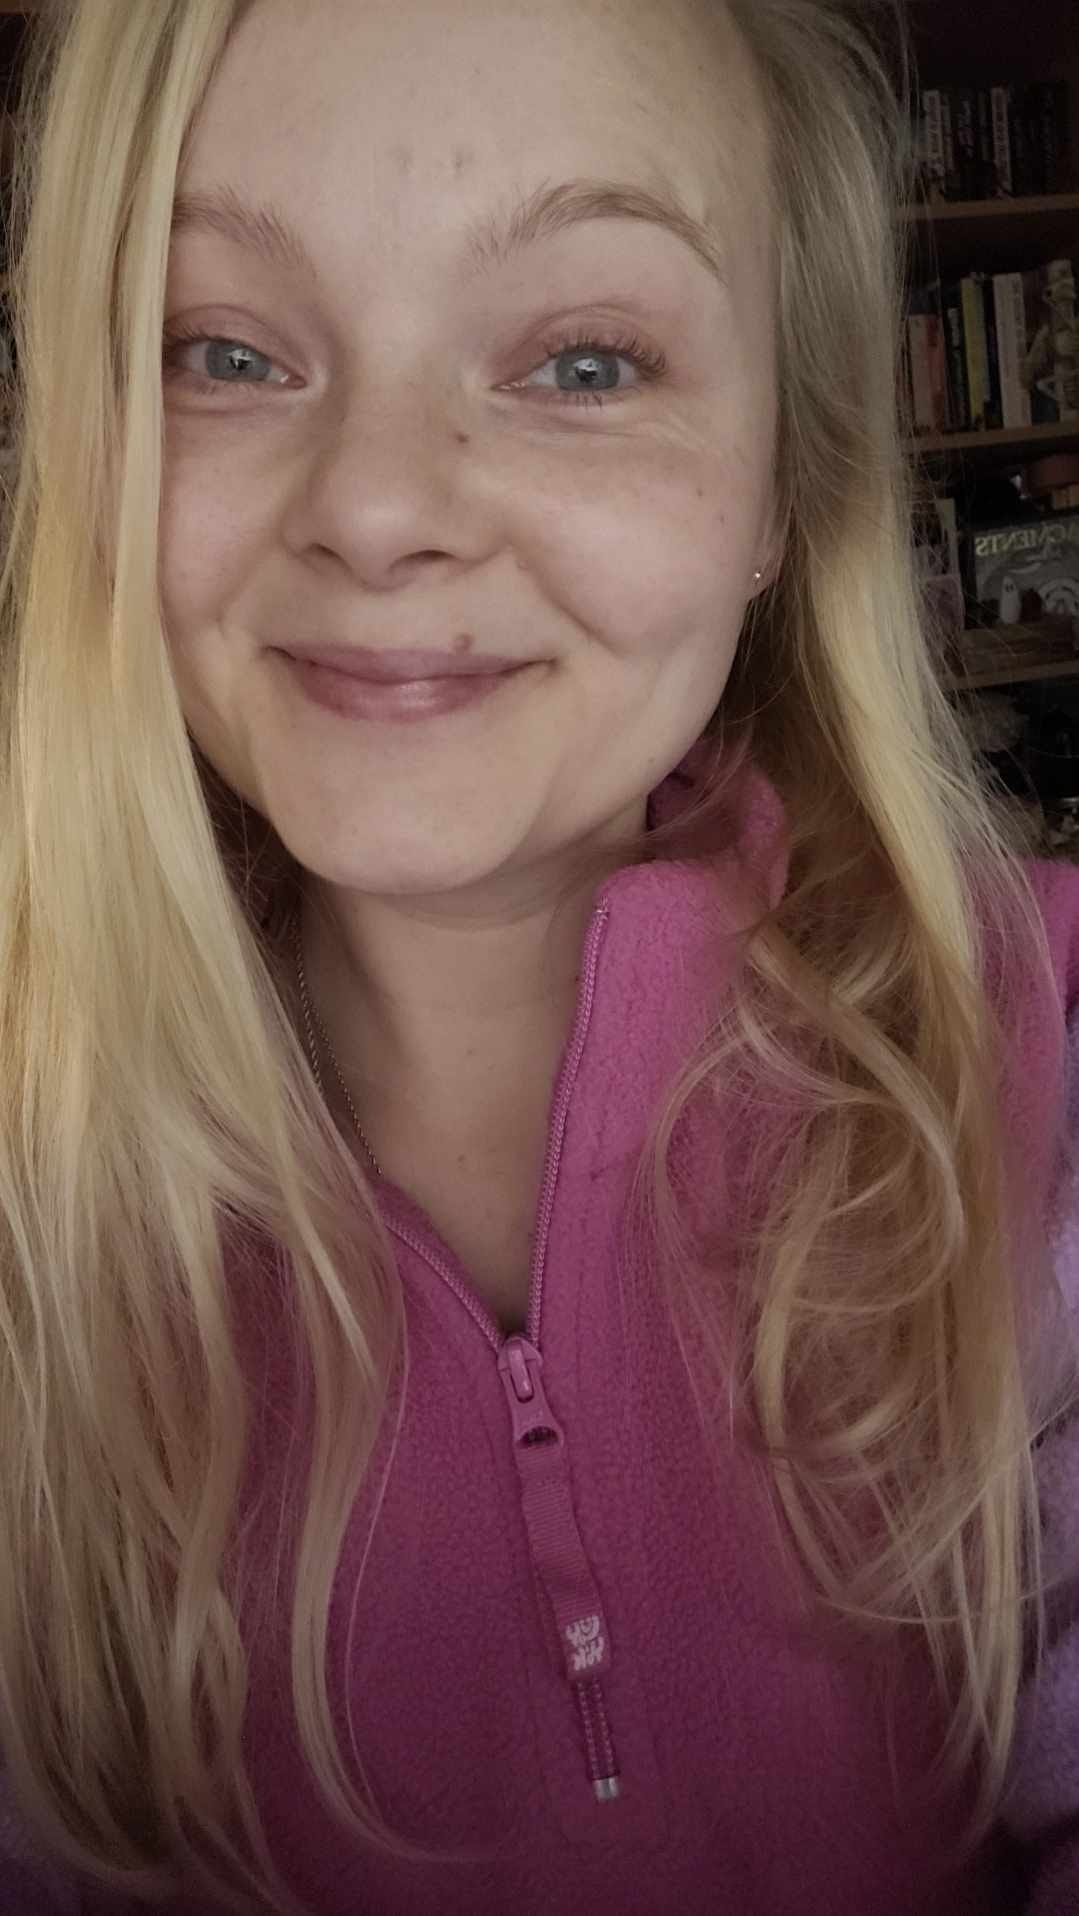 a blonde haired, white female, with blue eyes and a smiling face. She has long hair and is wearing a pink zip up fleece.